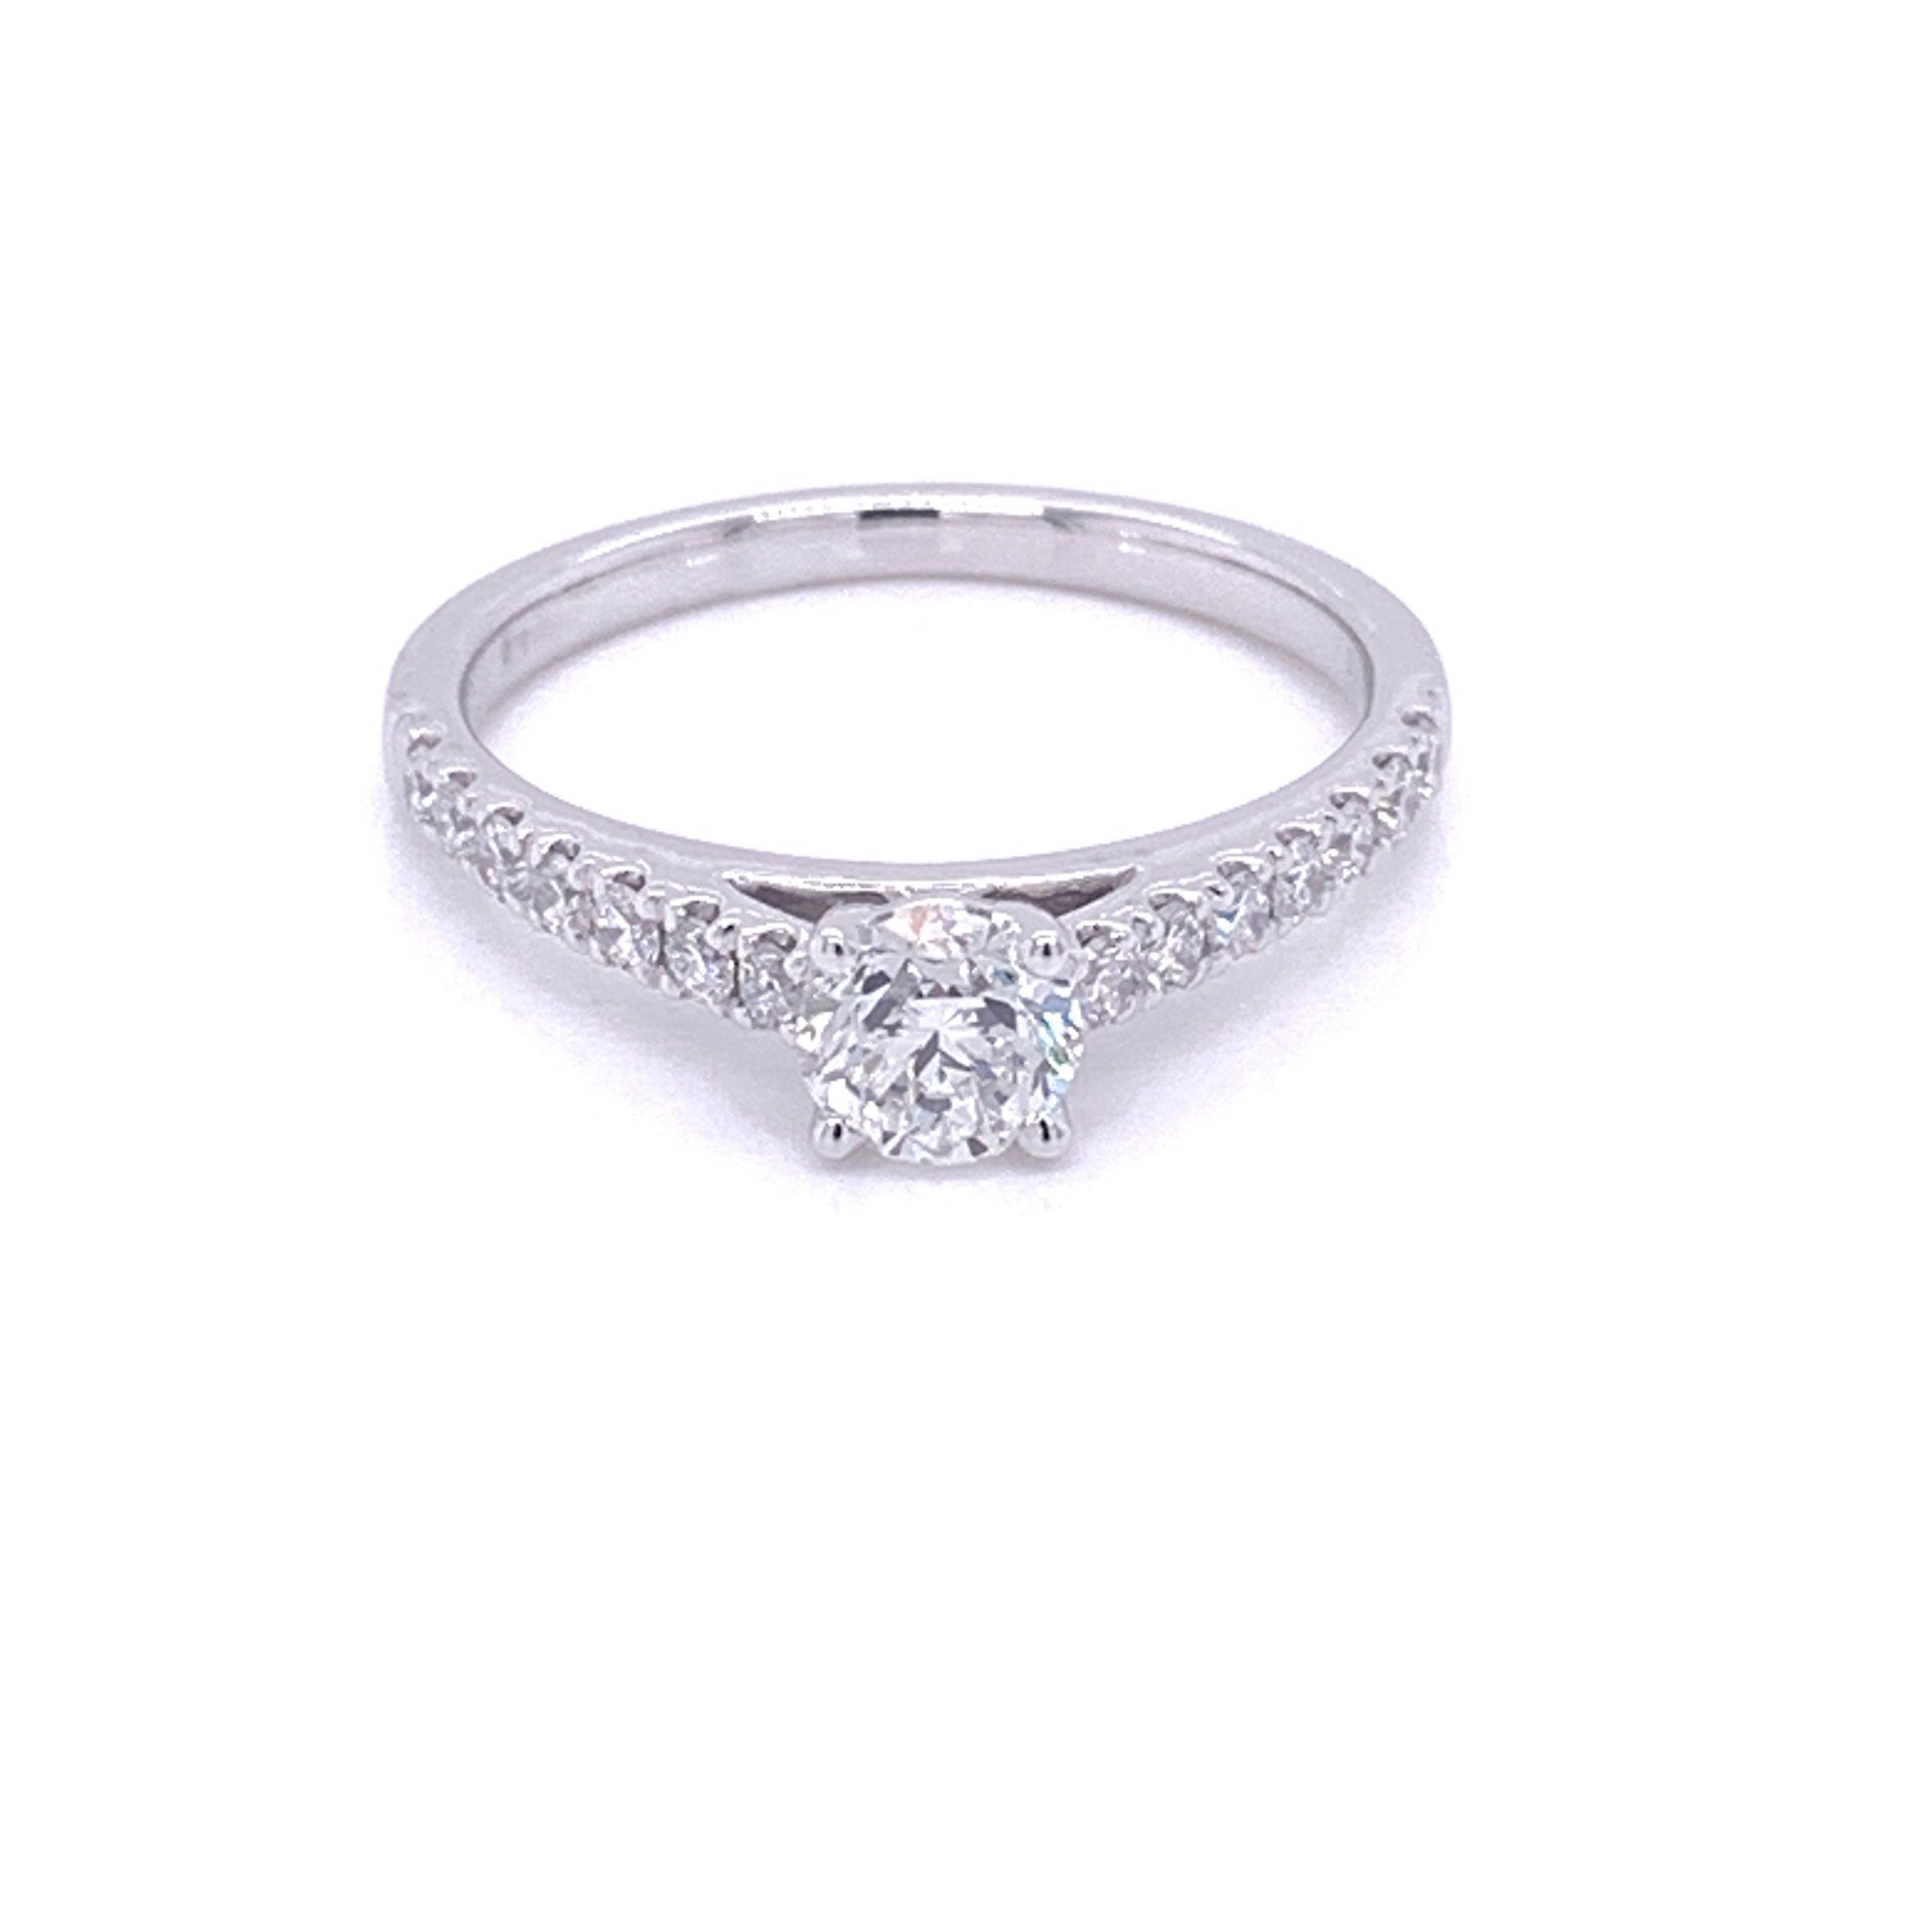 Round Brilliant Cut Diamond Solitaire With Diamond set Shoulders - 0.80cts  Gardiner Brothers   